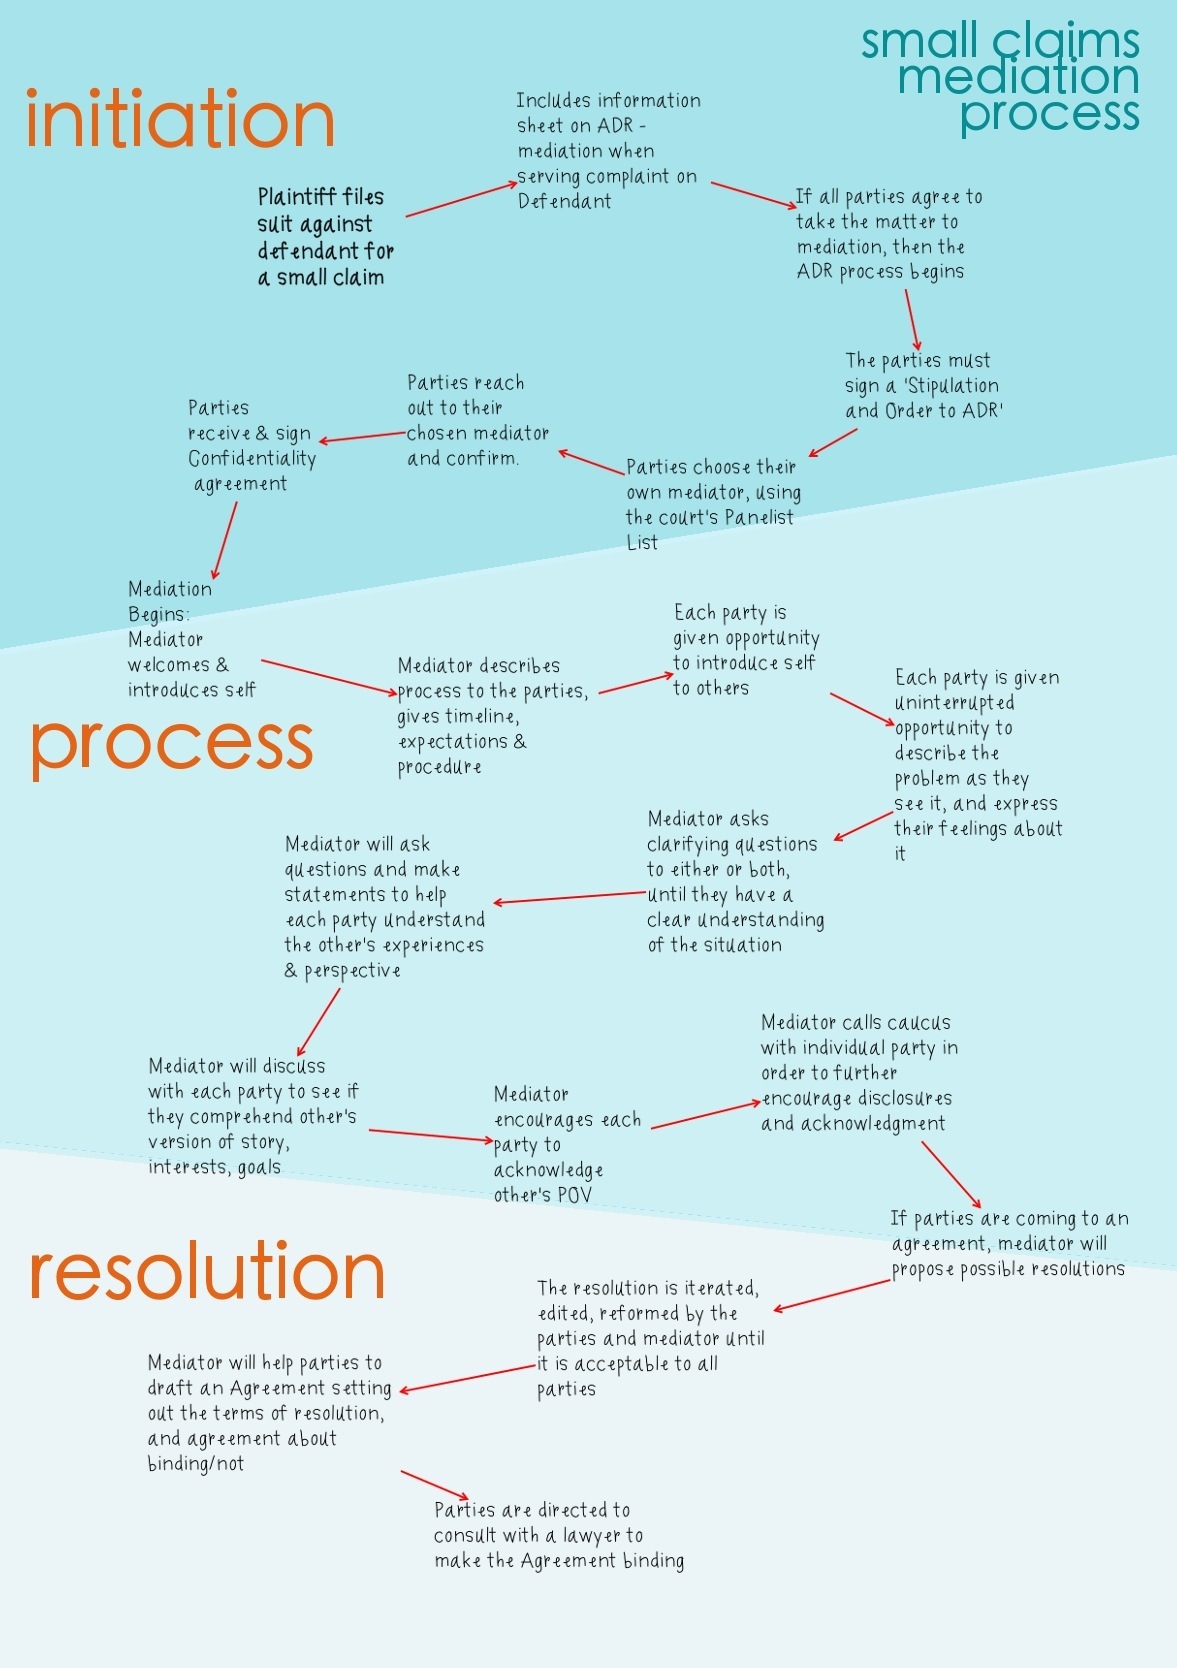 Small Claims Mediation Process -- a flow chart